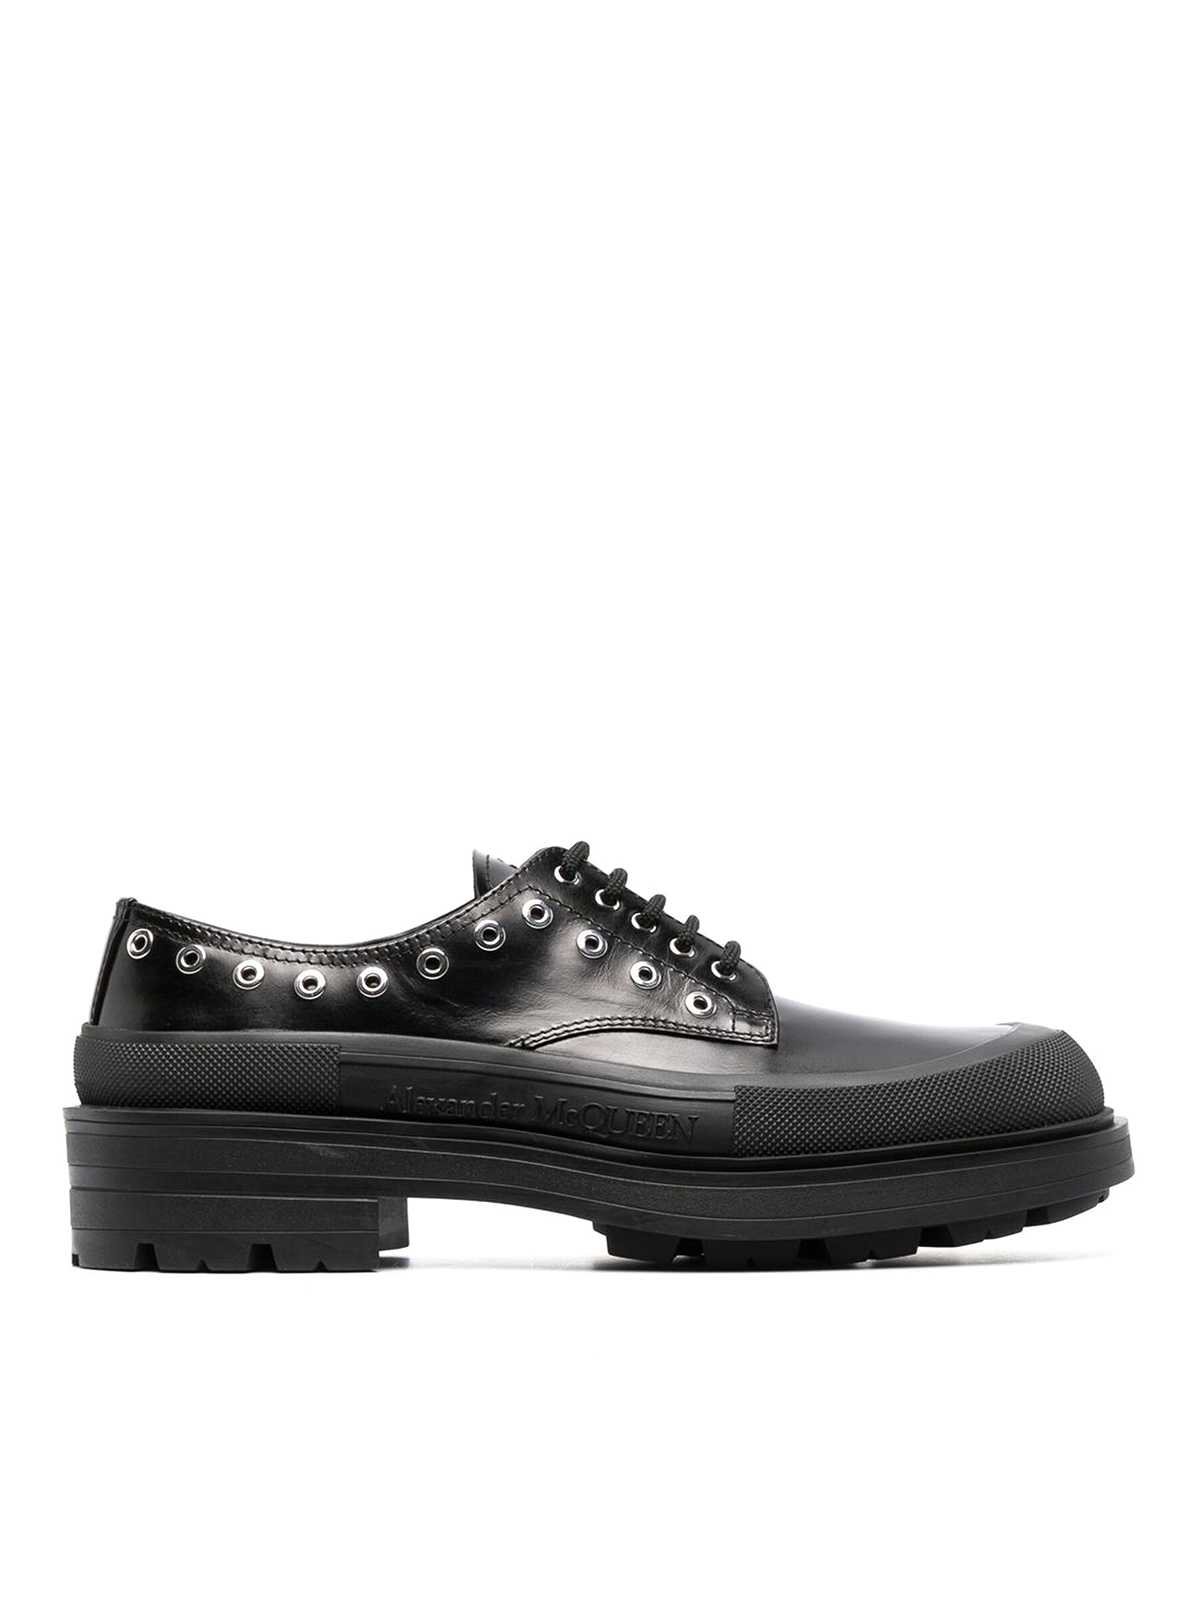 Alexander Mcqueen Leather Loafers Embellished With Eyelet In Black